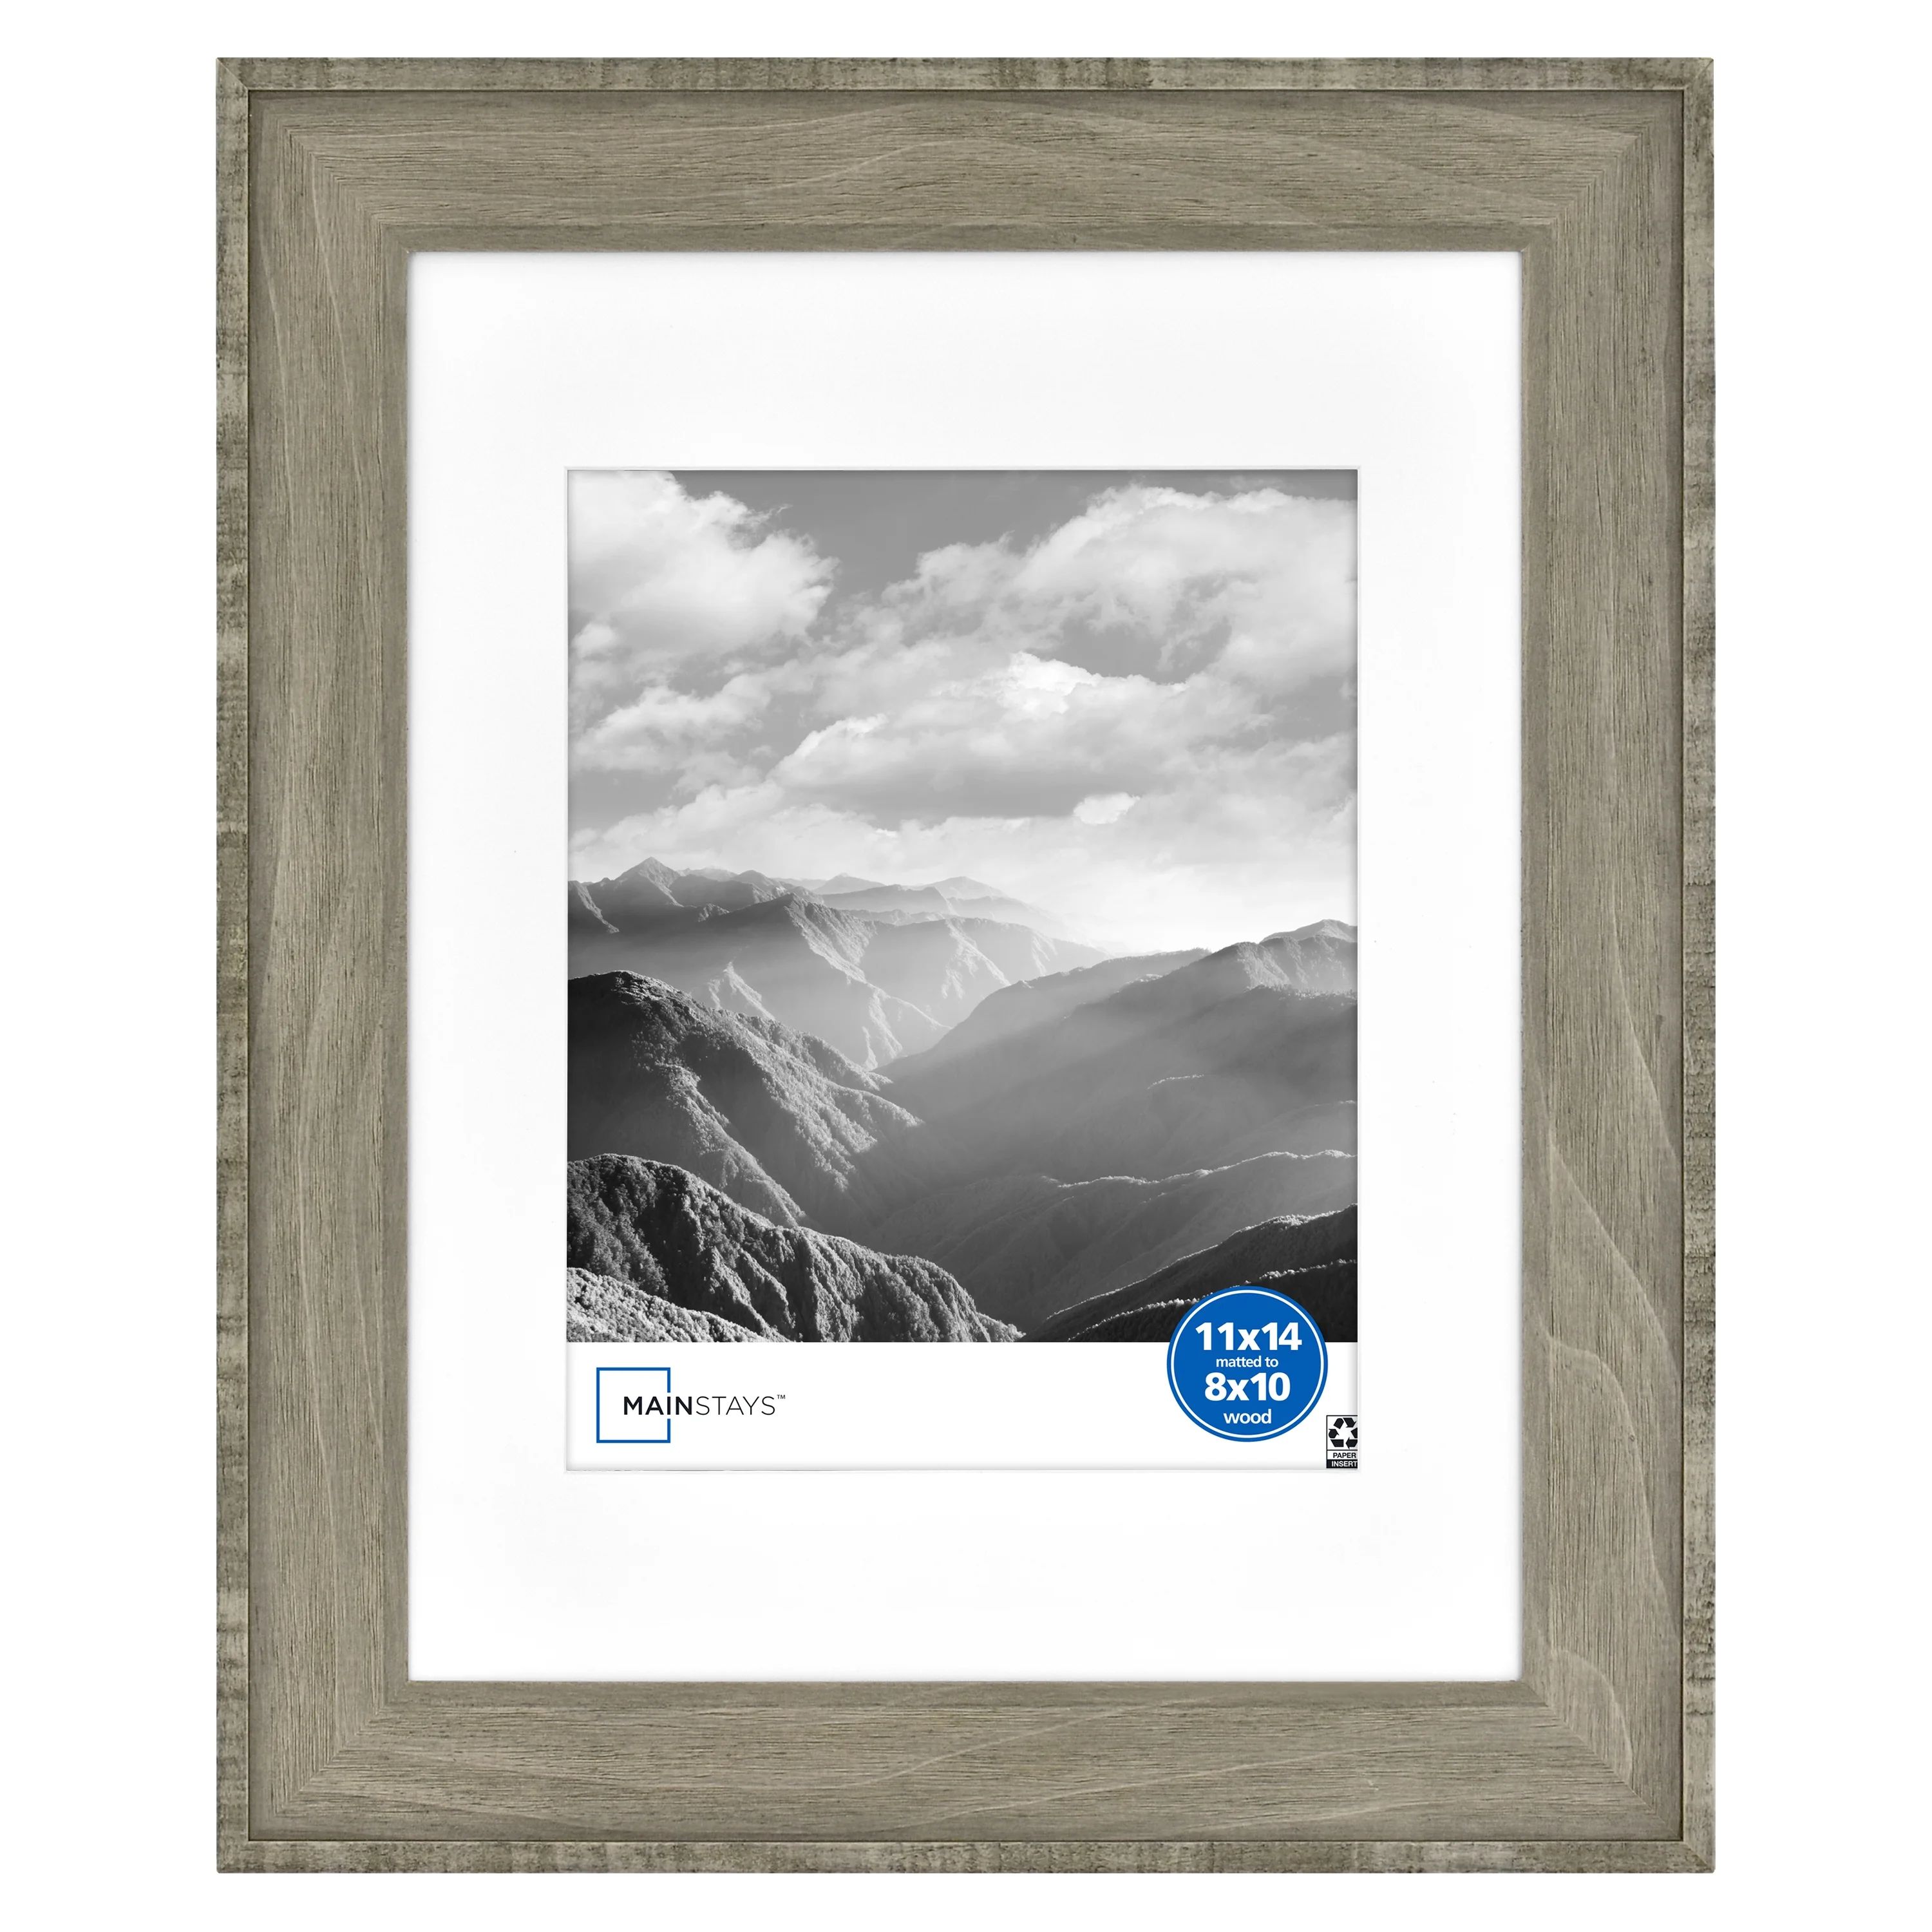 Mainstays 11" x 14" Wood Picture Frames, Gray | Walmart (US)